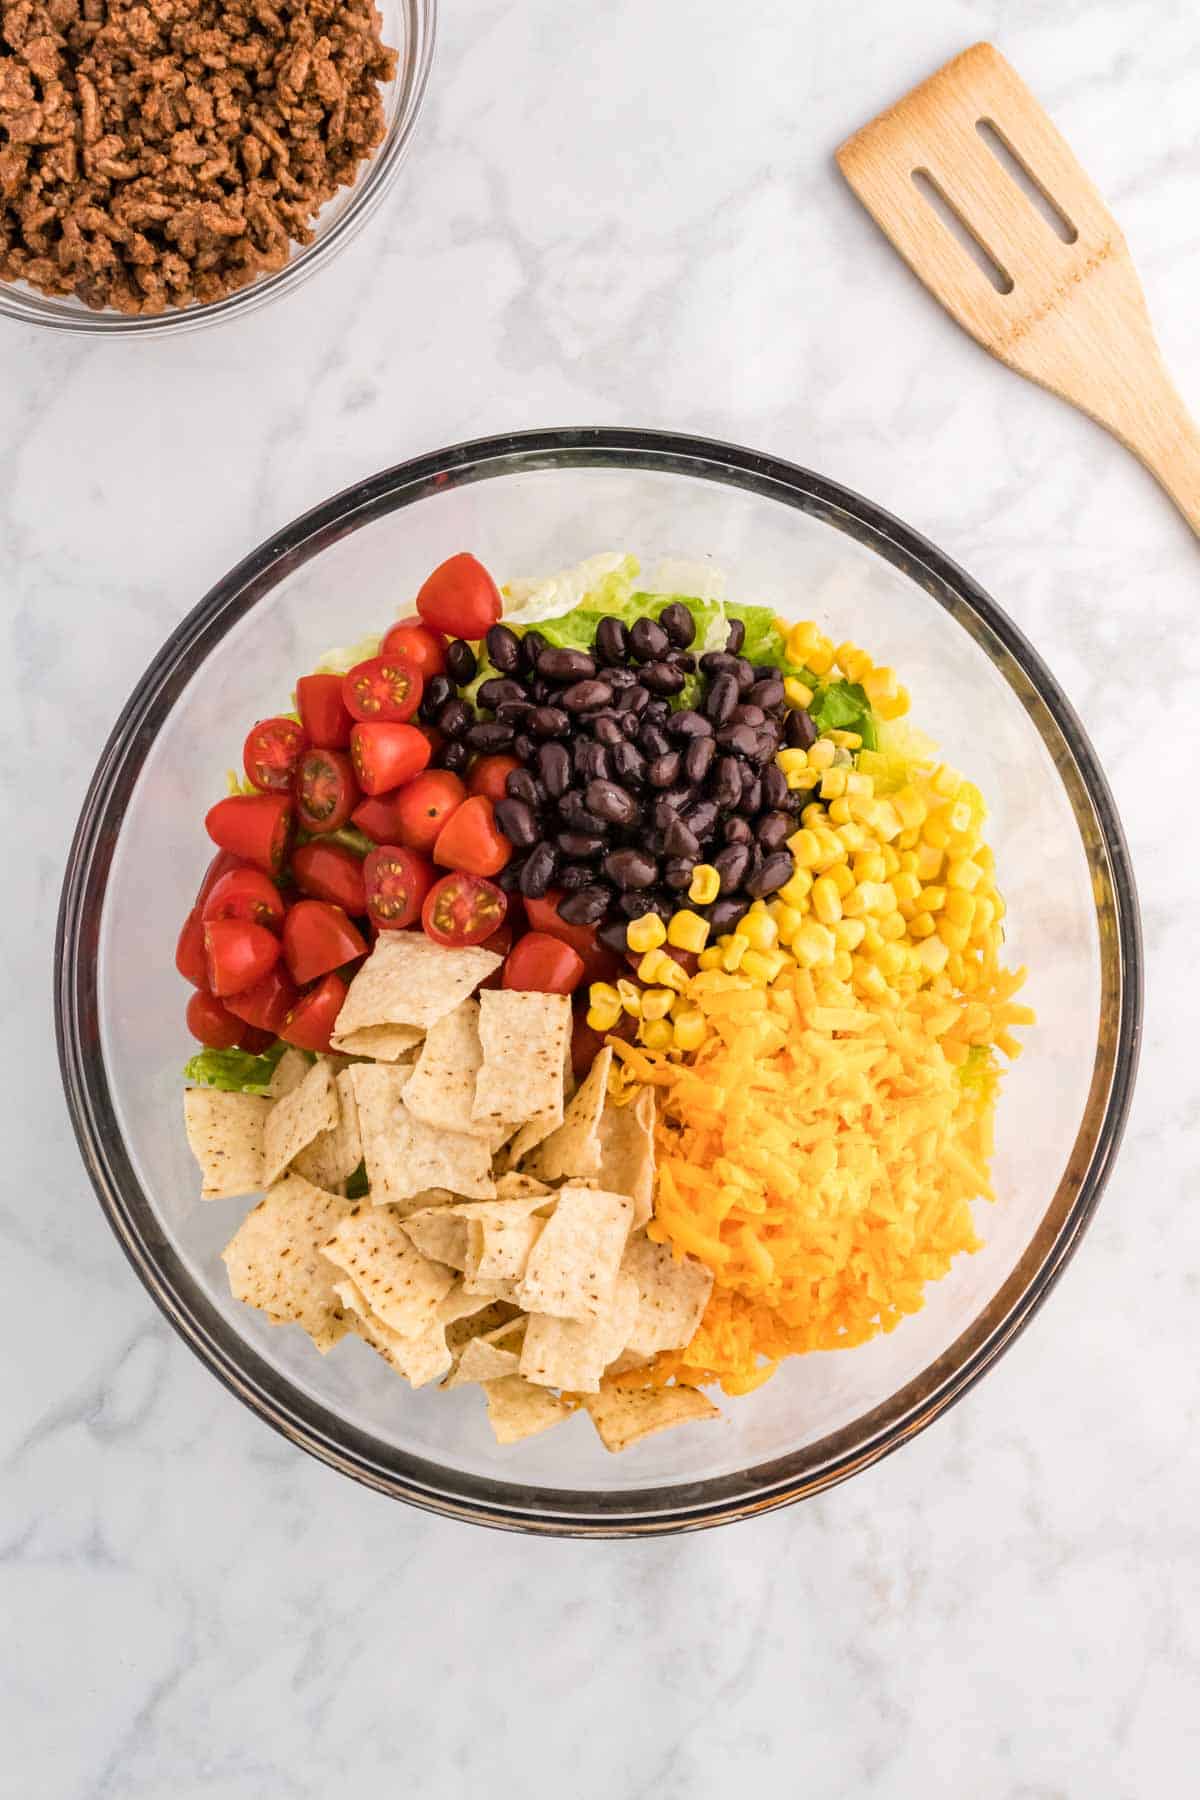 crumbled tortilla chips, shredded cheddar, corn, black beans and cherry tomatoes on top of chopped romaine in a bowl